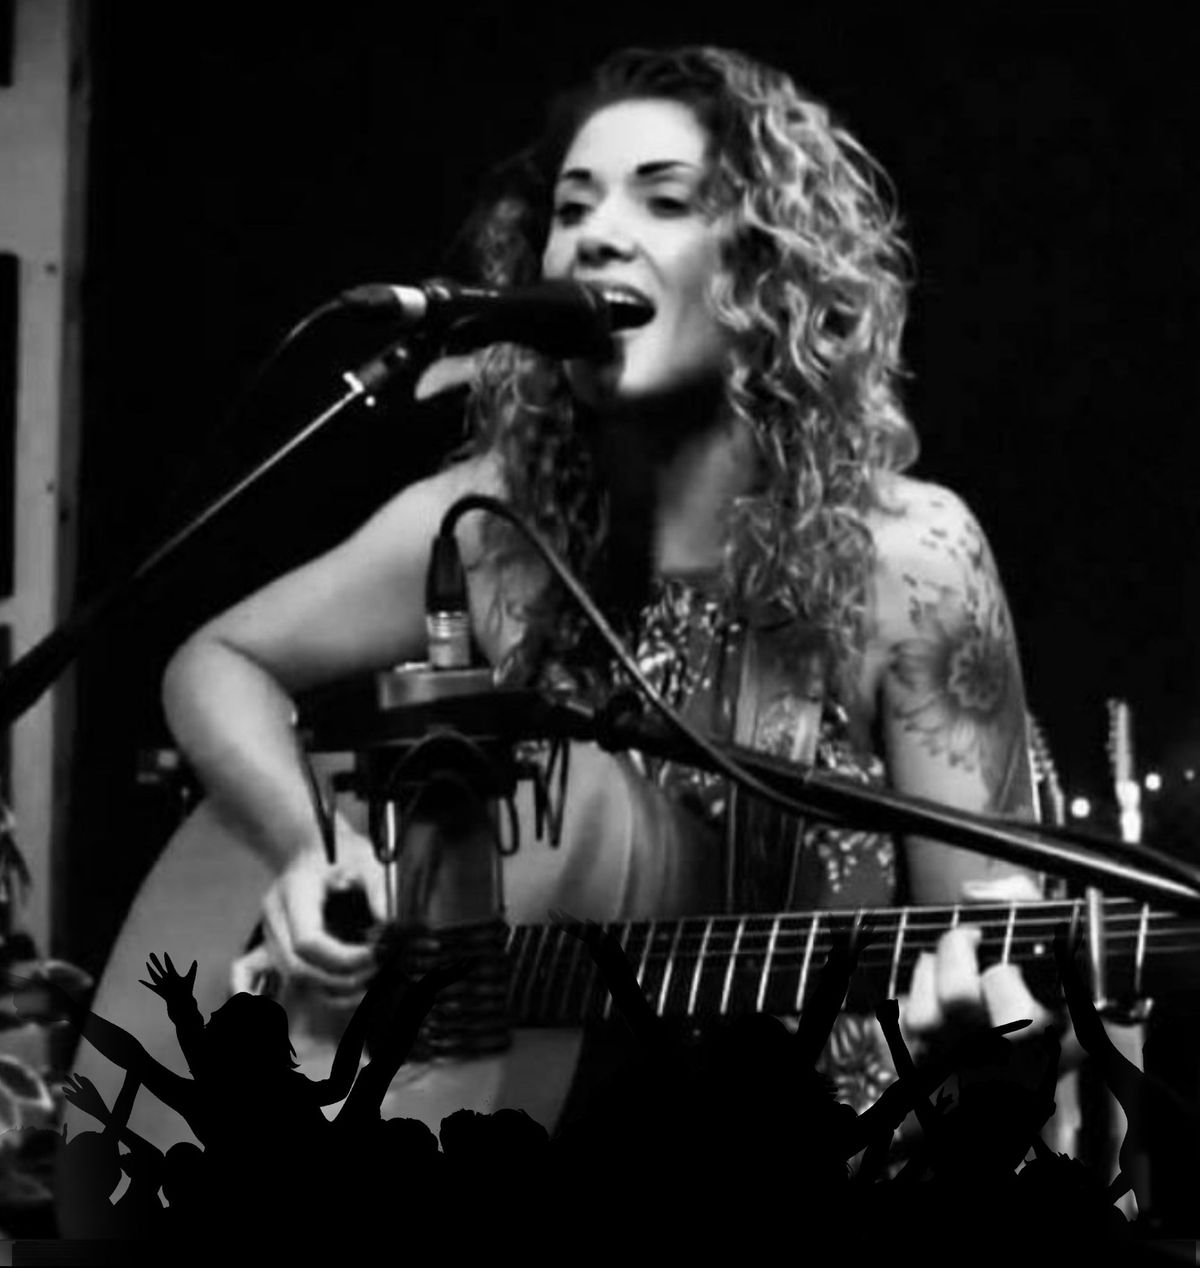 Kate West - Solo & Unplugged at The Crooked Billet, Leigh! \ud83c\udfa4